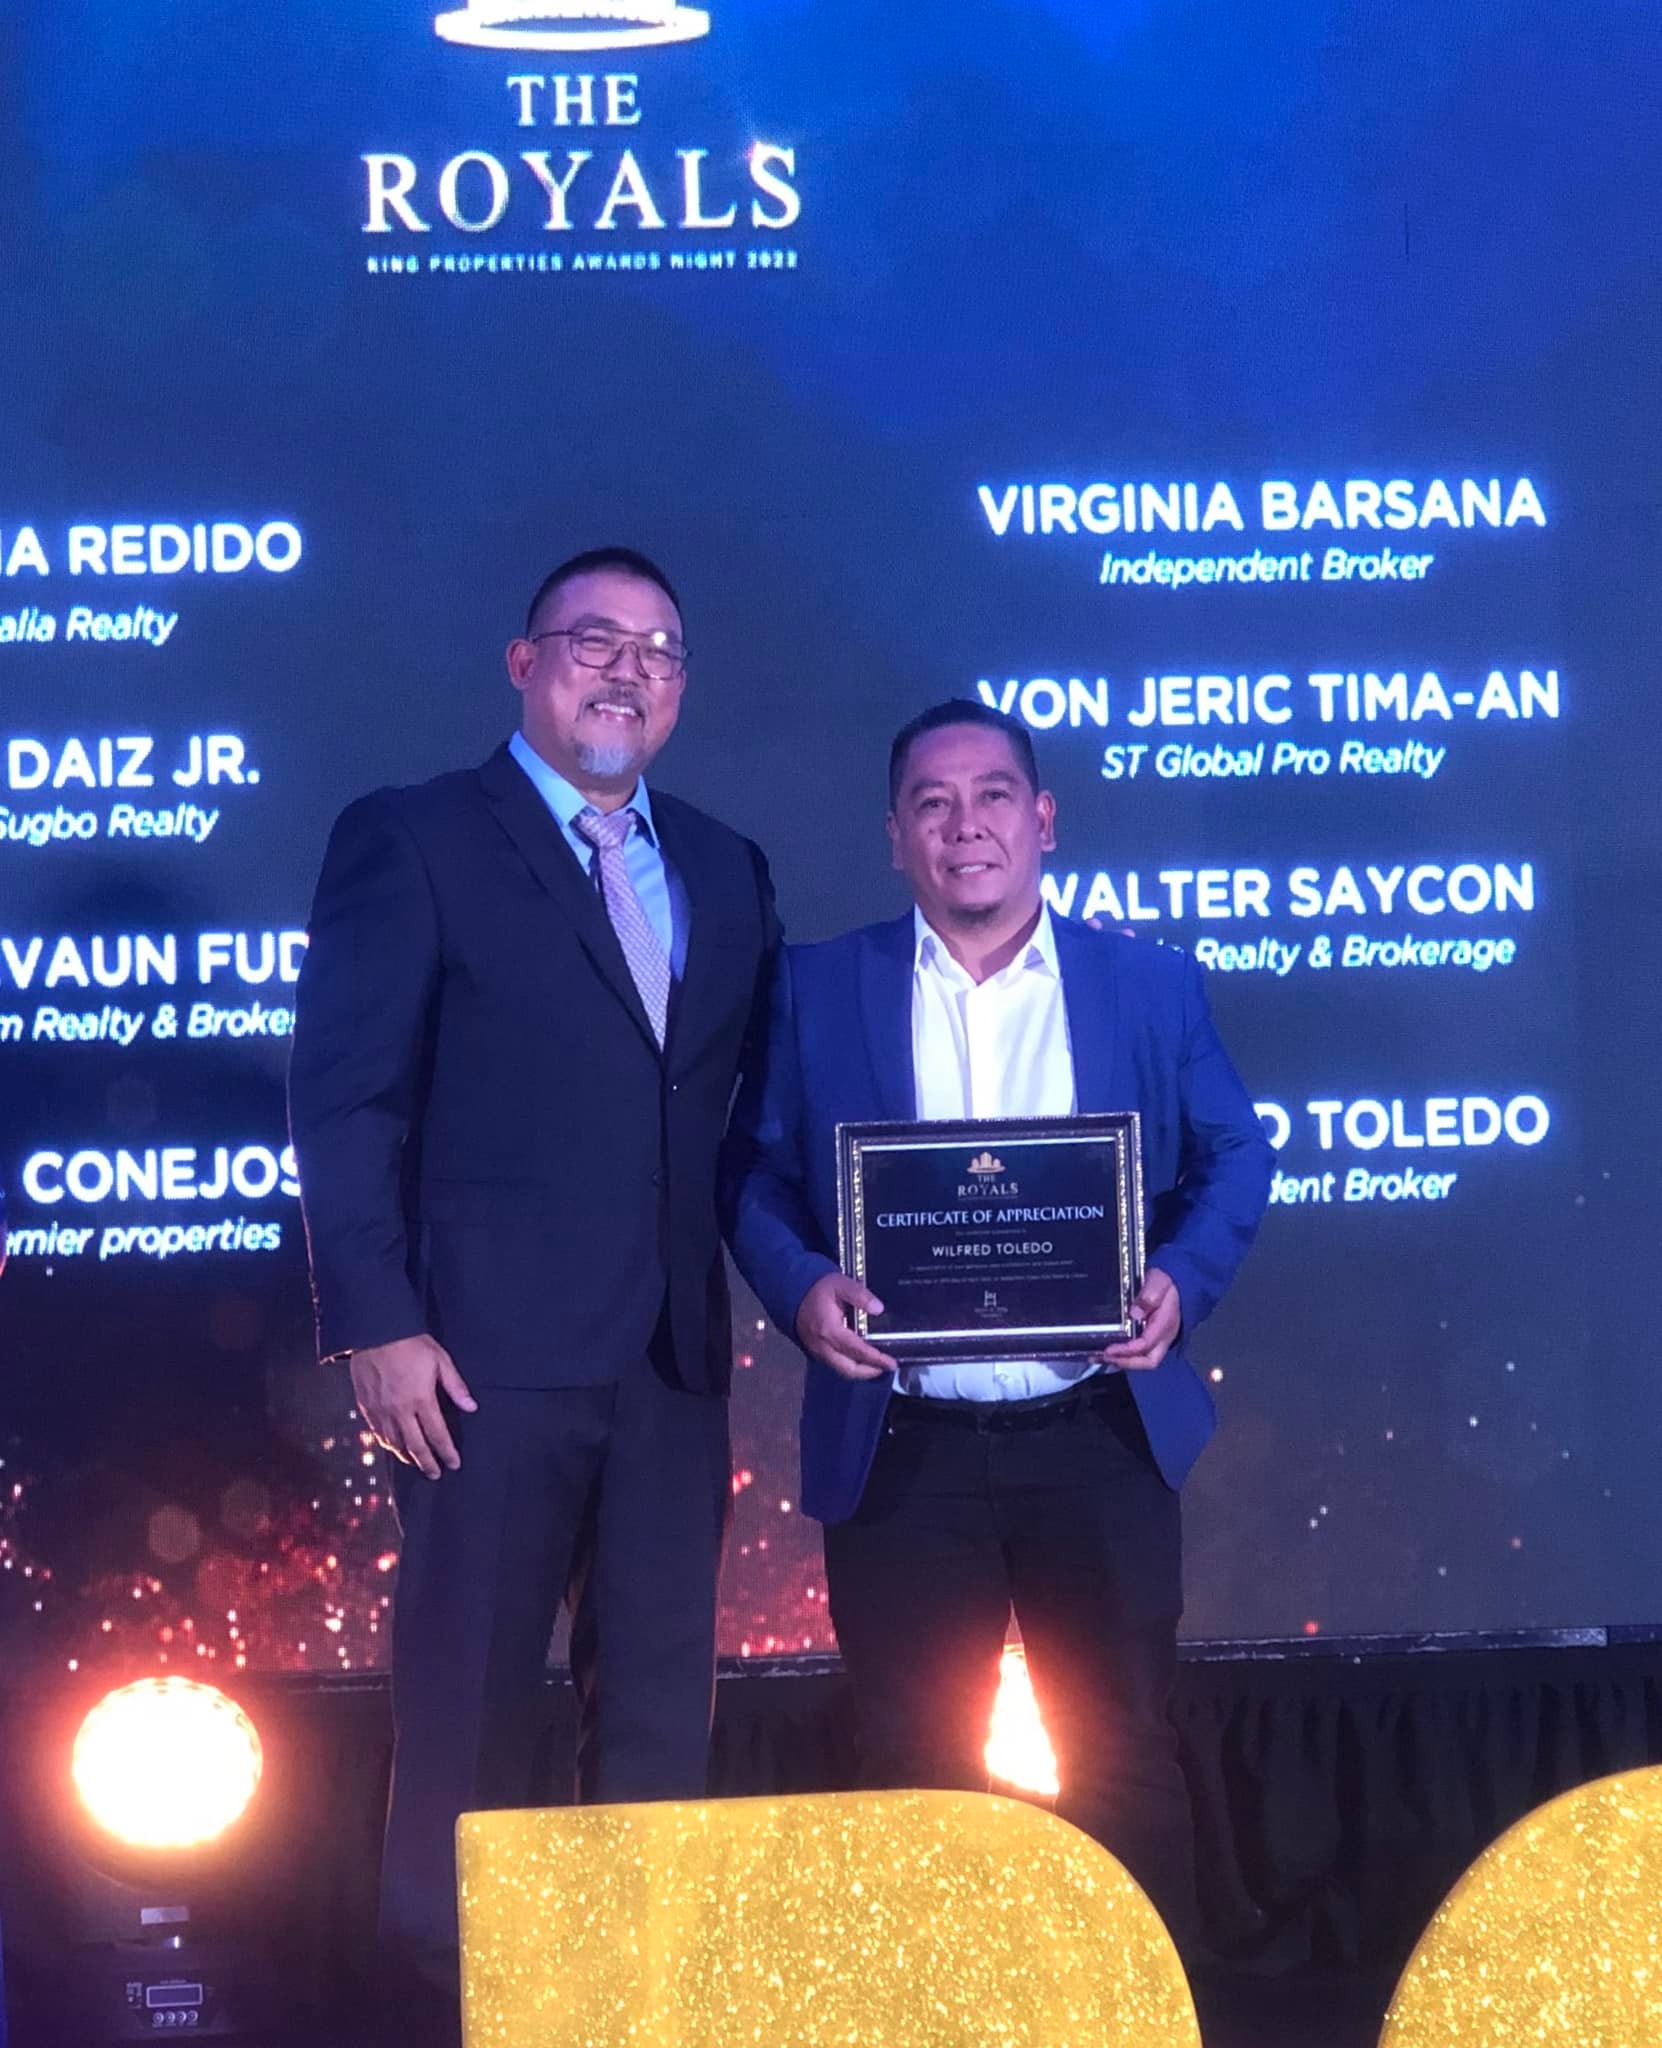 AWARDS & RECOGNITION GIVEN BY MODENA LILOAN, gabriel realty